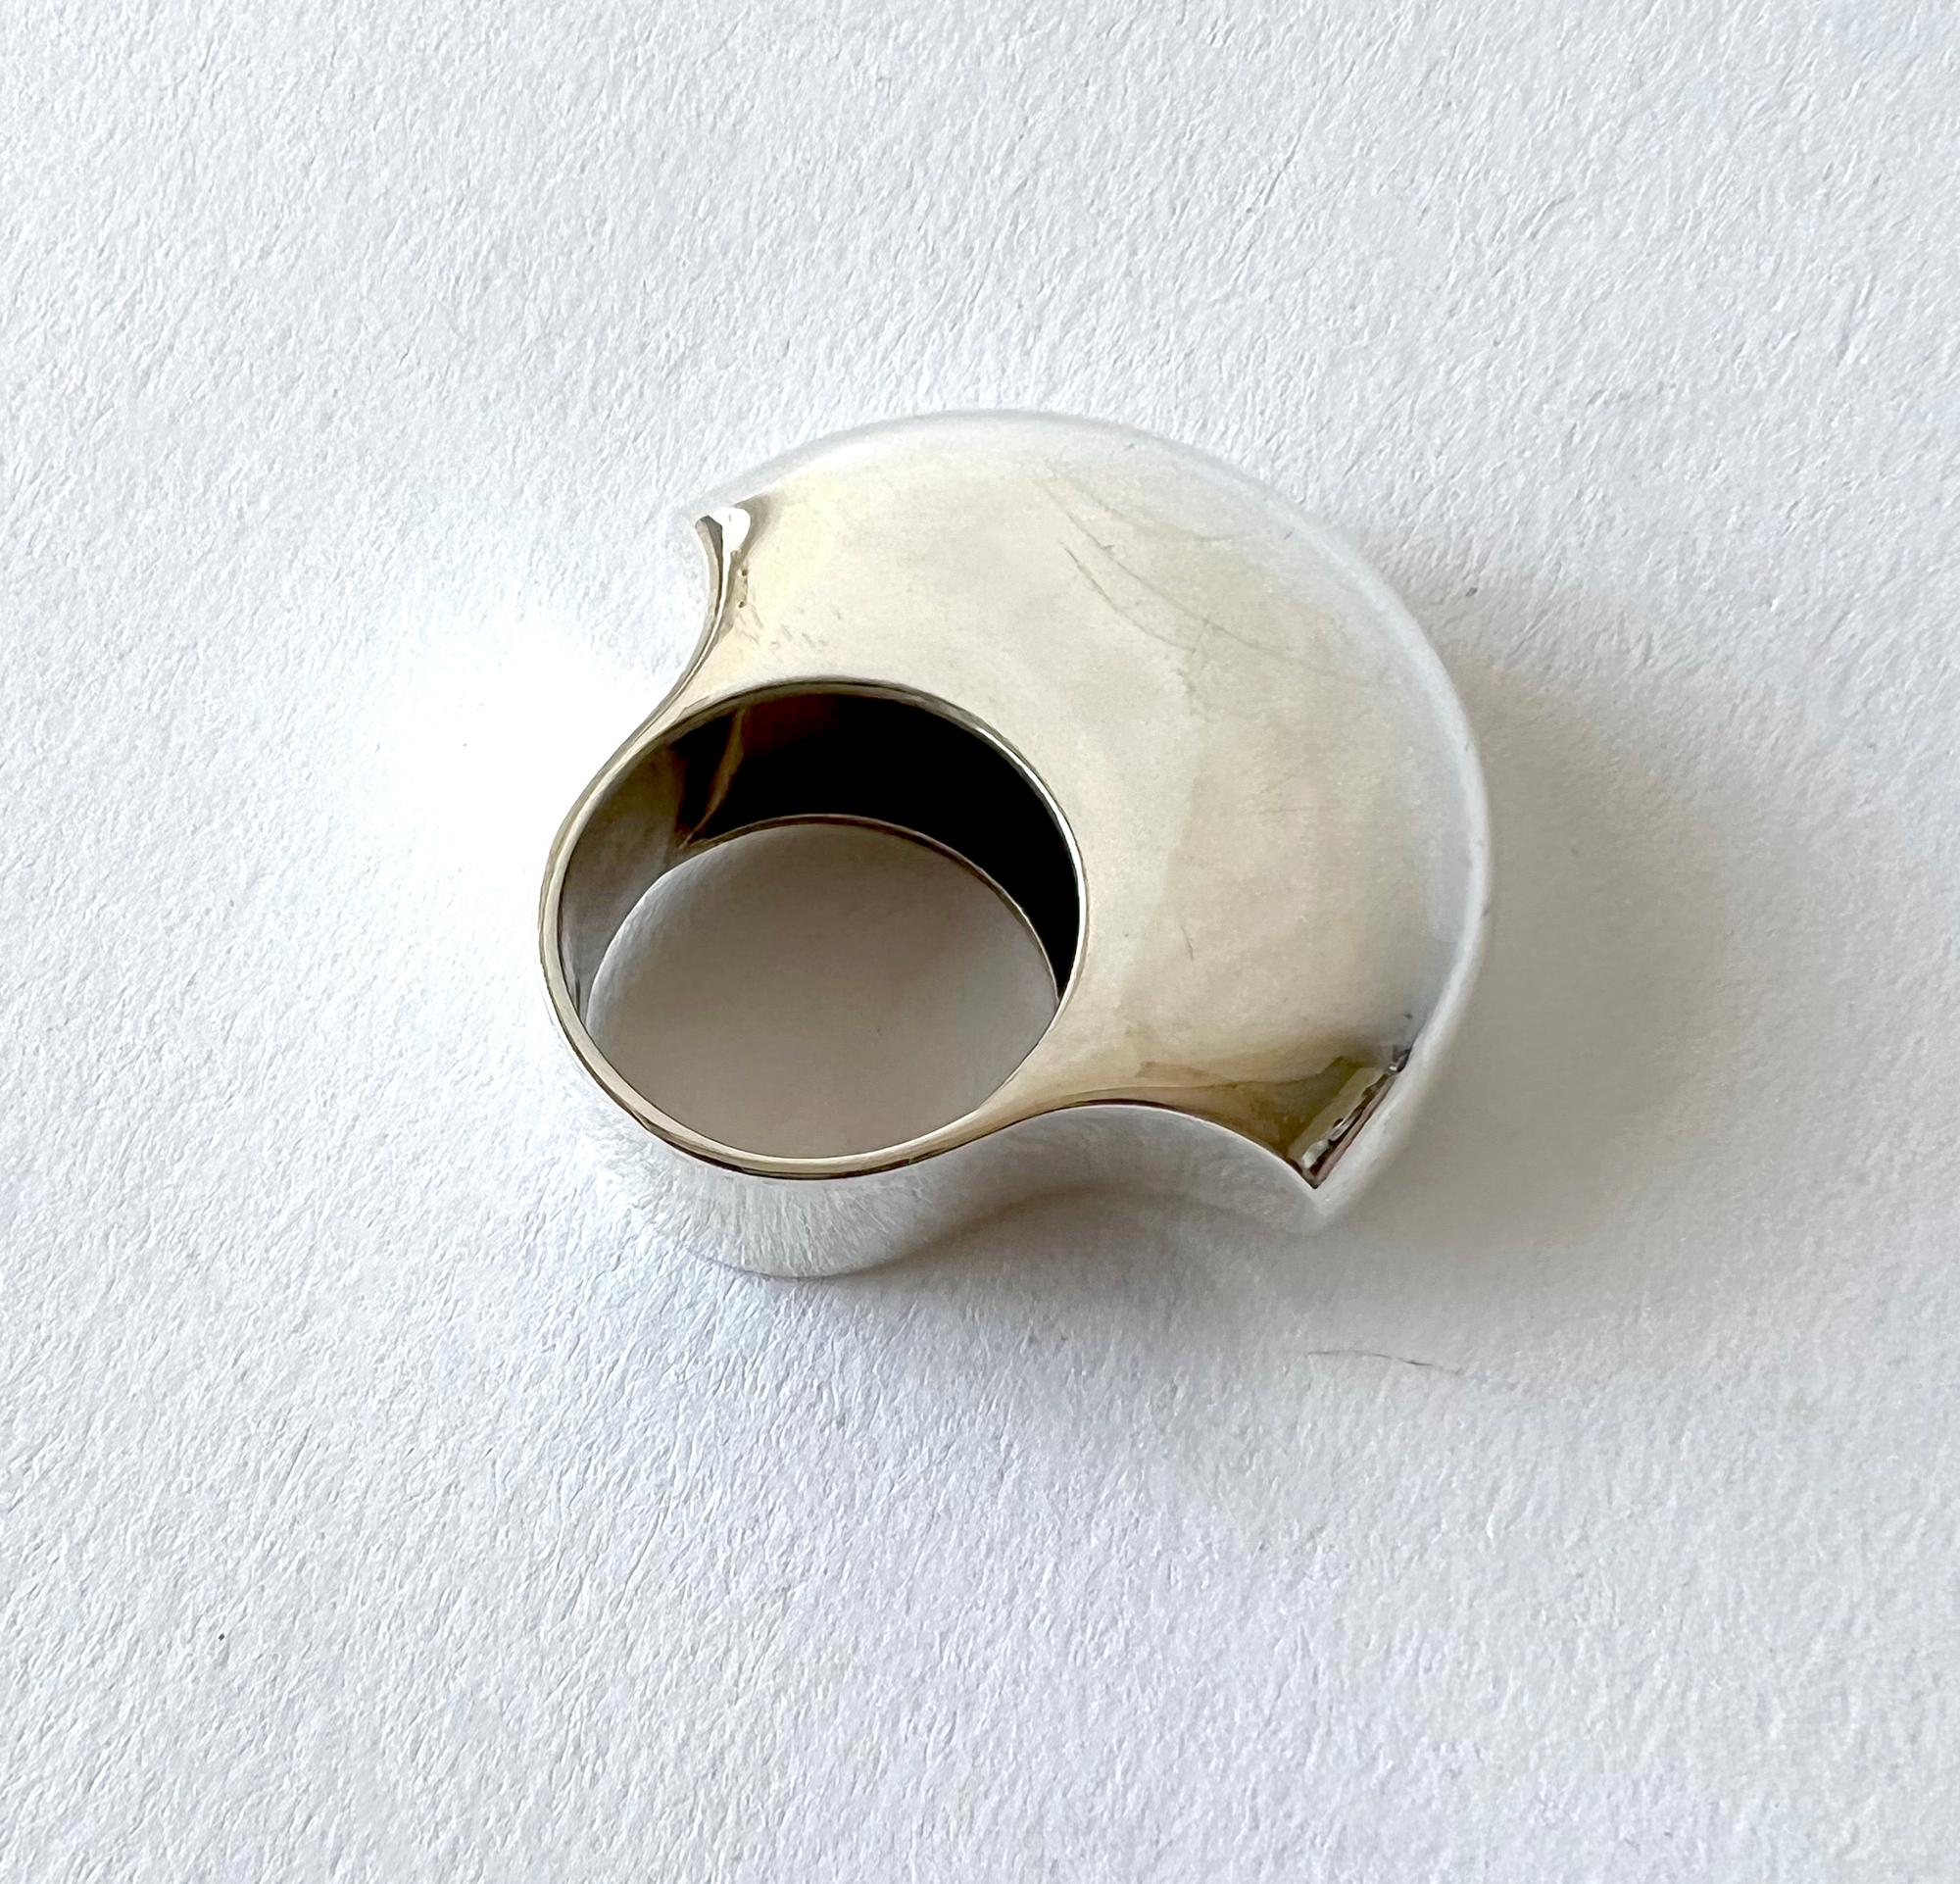 Sterling silver Finnish modern dome ring created by Pekka Piekainen, for Auran Kultaseppa Oy, circa 1975.  Ring is a finger size 6 and is signed with Auran Kultaseppa Oy hallmark, 925, X7 (1975), PP, Finland.  In very good vintage 1970s condition.  